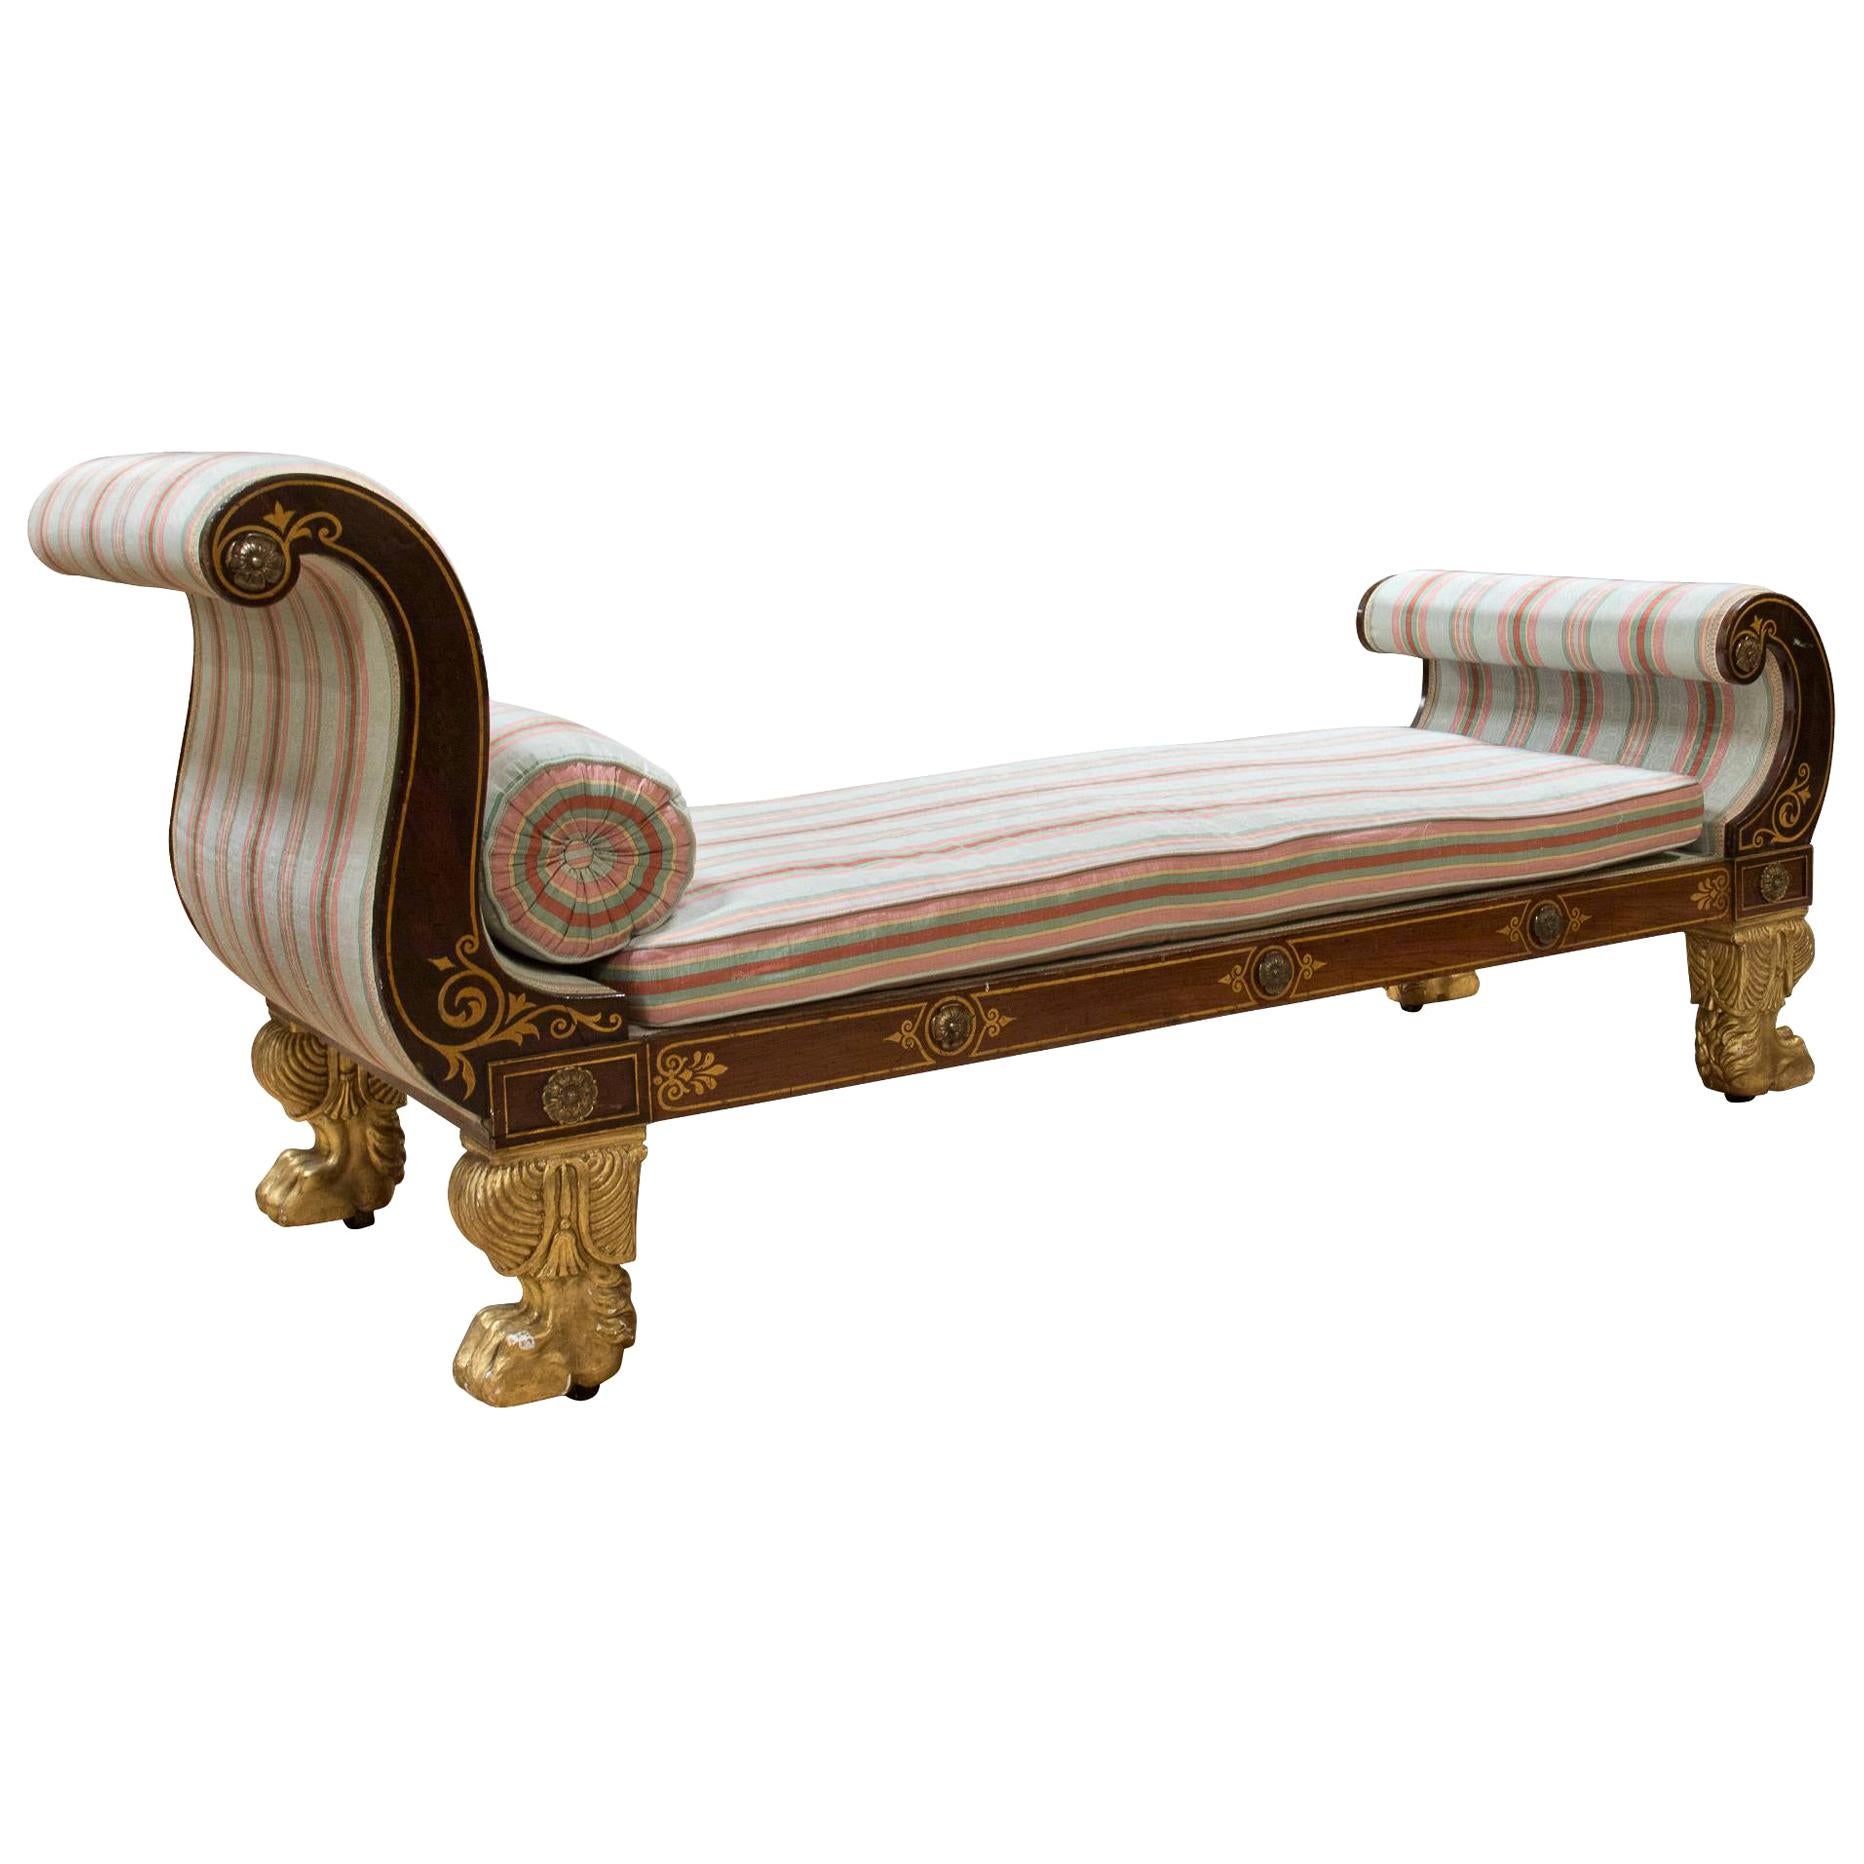 Regency Faux Rosewood and Ormolu-Mounted Chaise Lounge For Sale